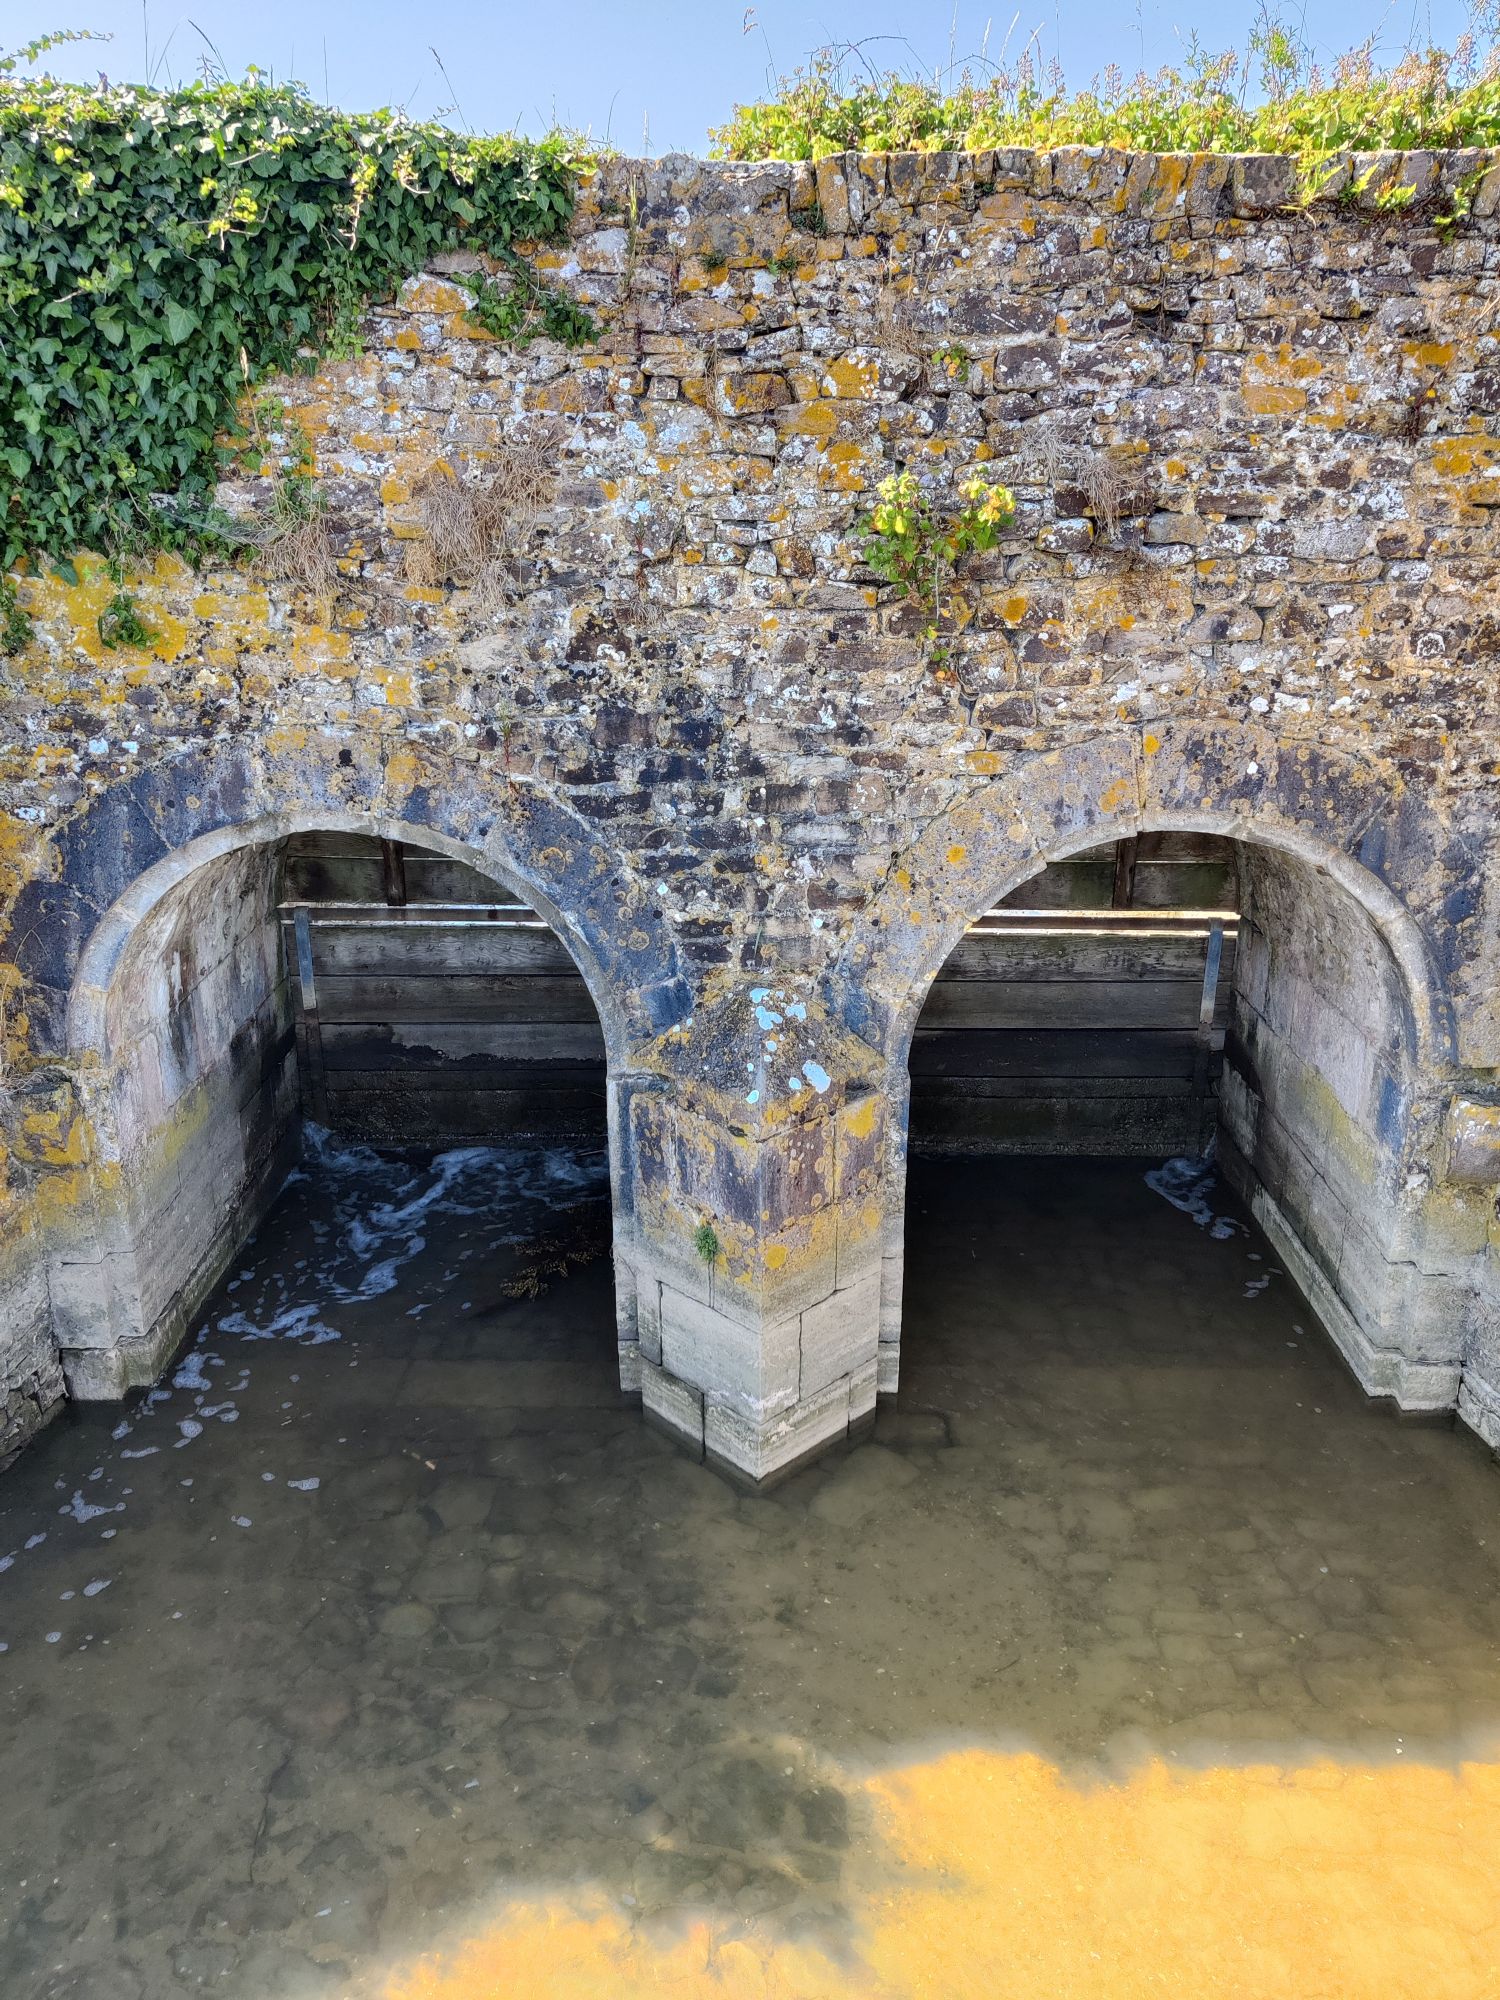 An arched stone floodgate holding back a paltry amount of saltwater in a marsh